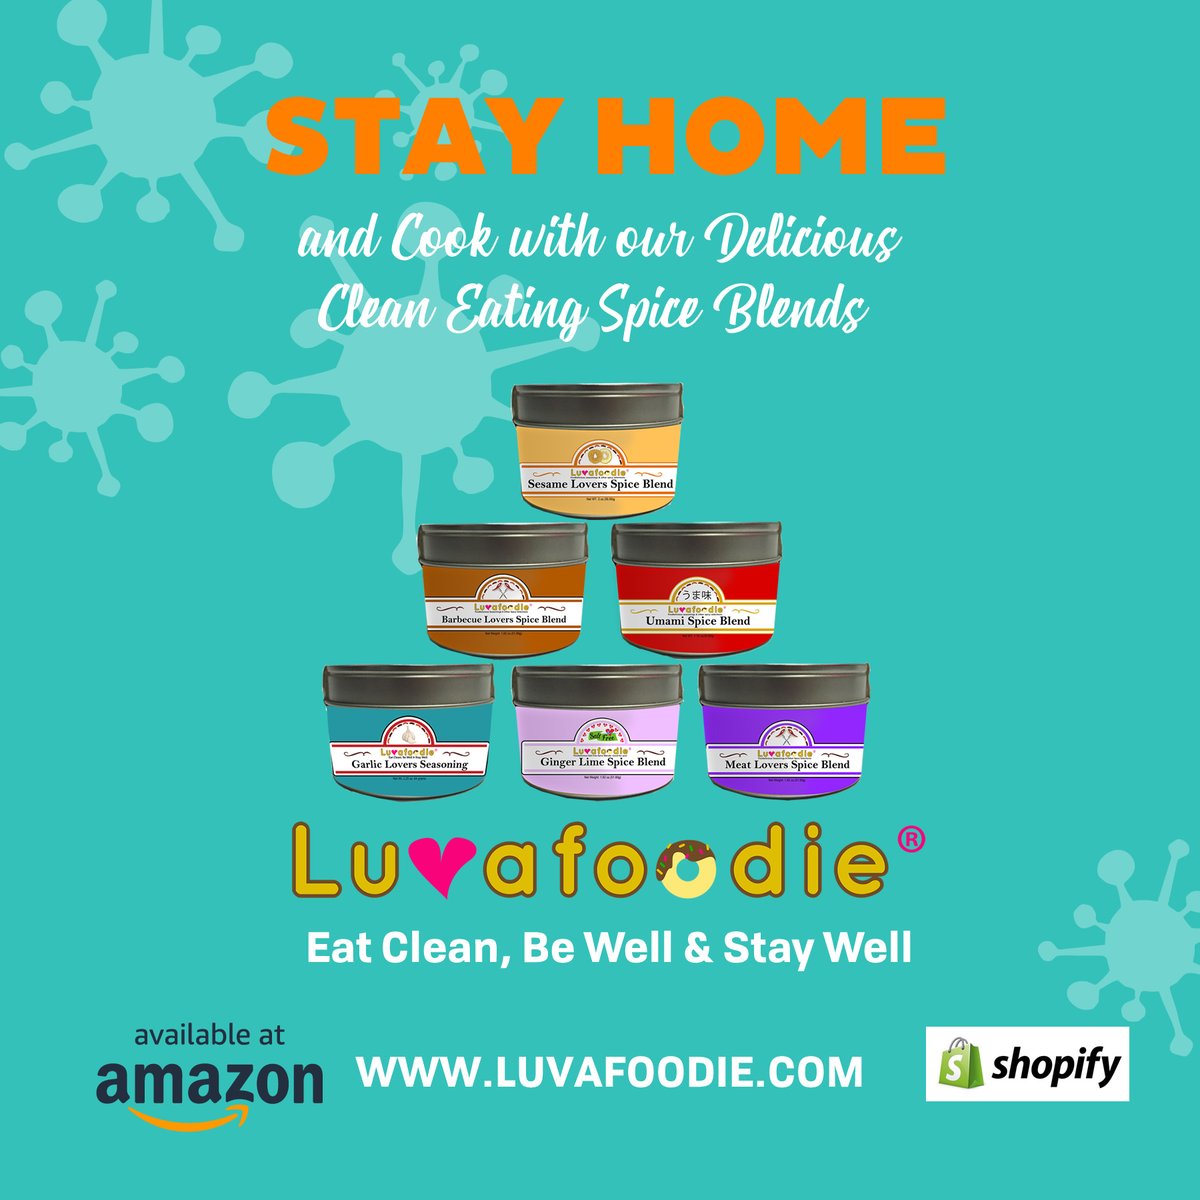 #stayhome #cookathome #foodies #homecooking #families #COVIDー19 #COVID #eatingathome #Foodies #FoodieTwitter #home #shoponline #HealthyLiving #healthyspices #glutenfree #chemicalfree